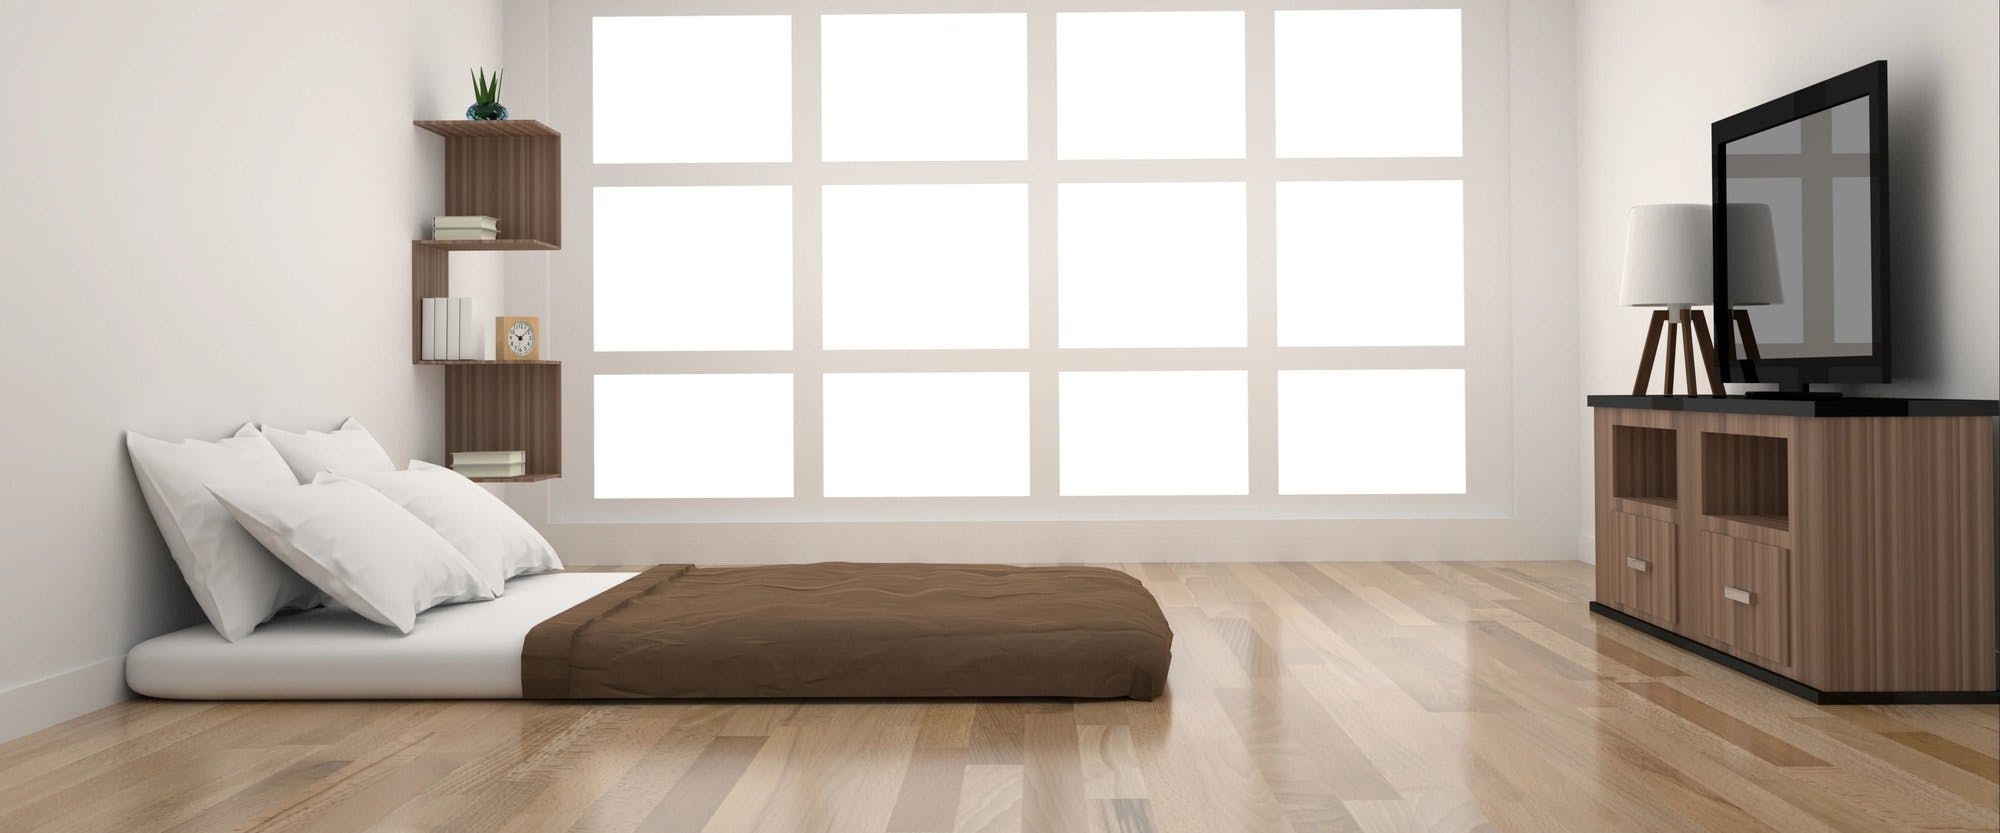 How To Prevent Your Bed From Sliding On Wood Floor